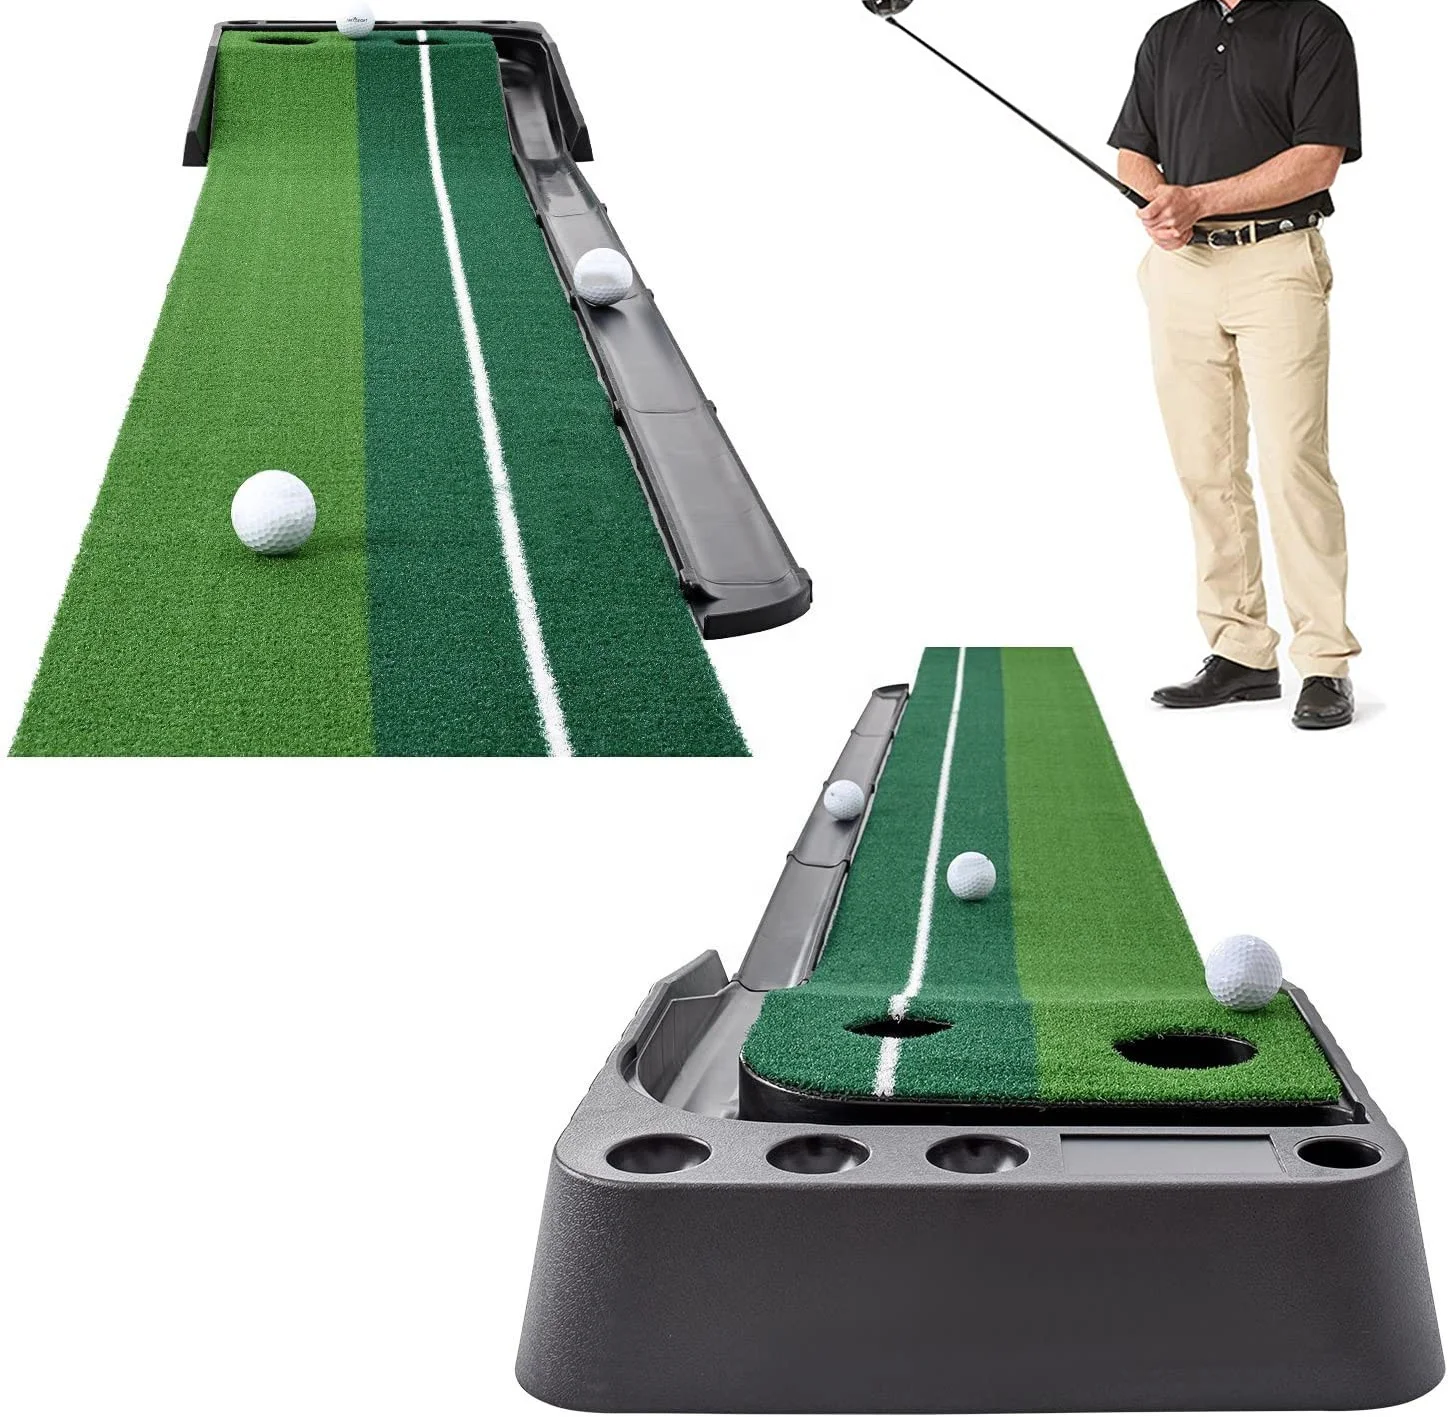 

Wholesale Indoor Golf Putting Green Portable Mat with Auto Ball Return Function Mini Golf Practice Training Aid